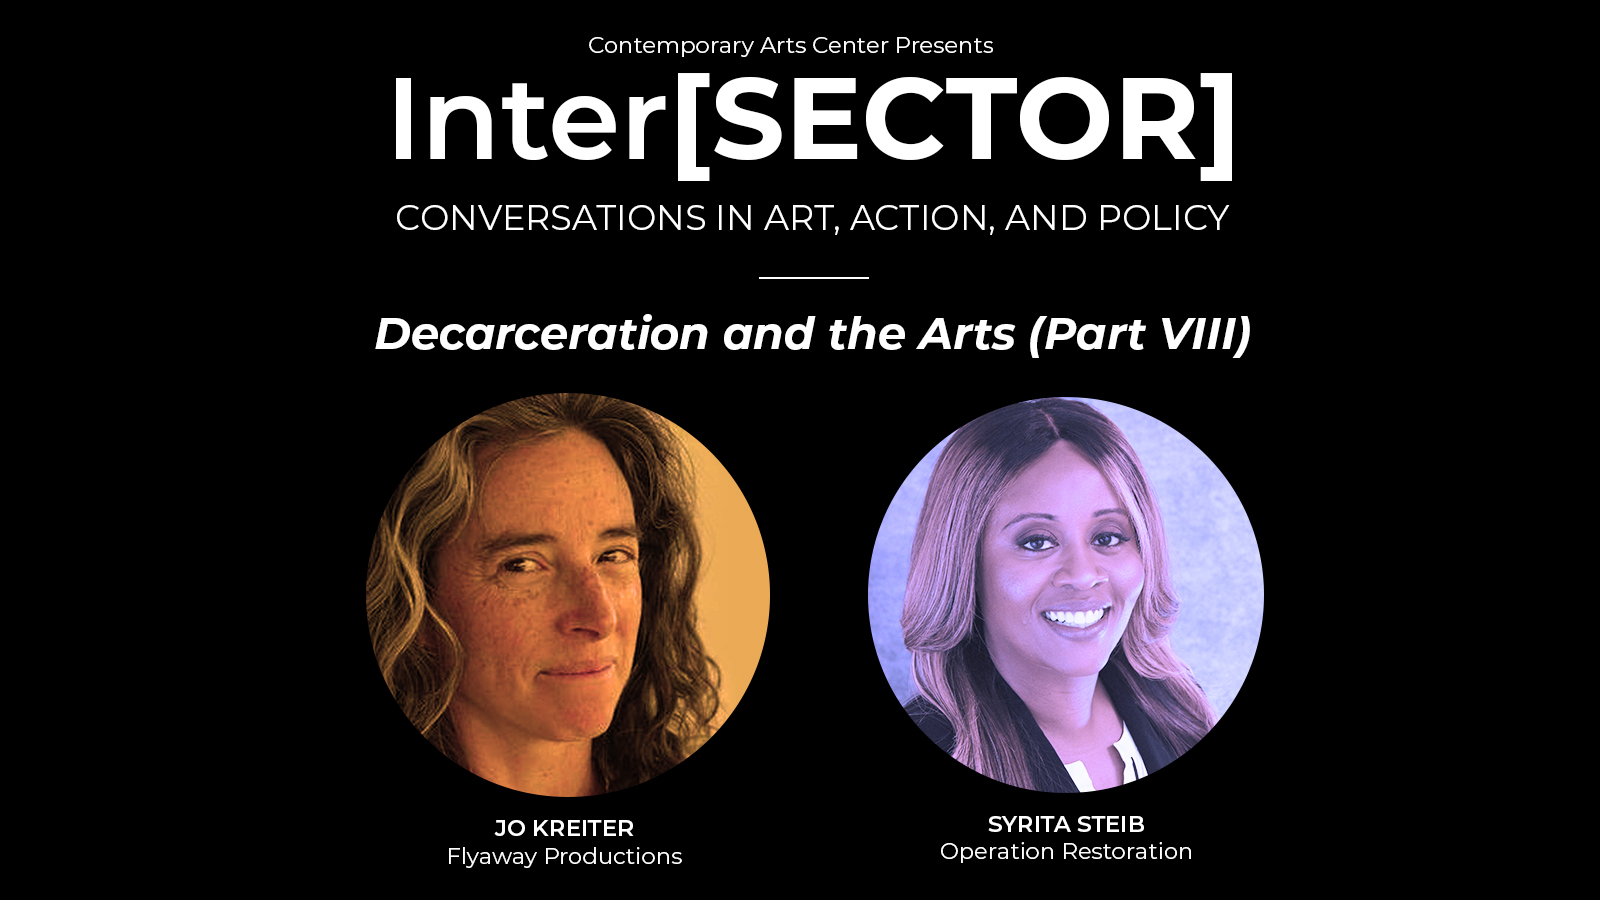 Inter[SECTOR]: Decarceration & the Arts with Syrita Steib (Operation Restoration)